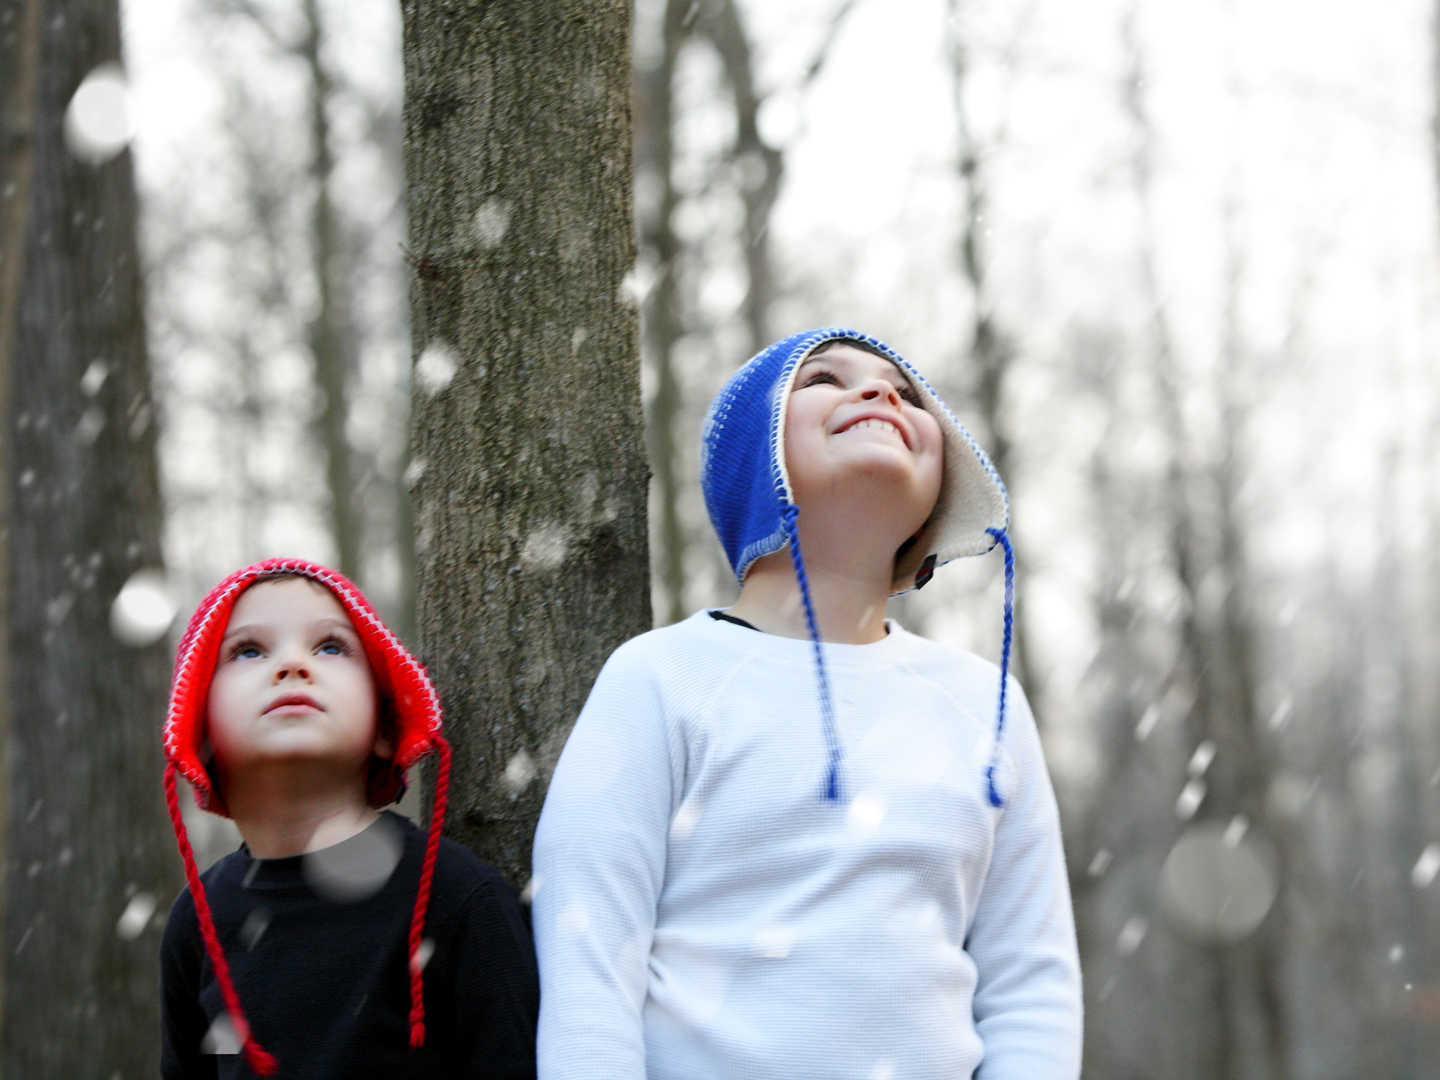 These two brothers, both diagnosed with autism and ADHD, enjoy being outside together. You can sense the wonder and joy they feel as they look up at the first snow fall of the winter season.